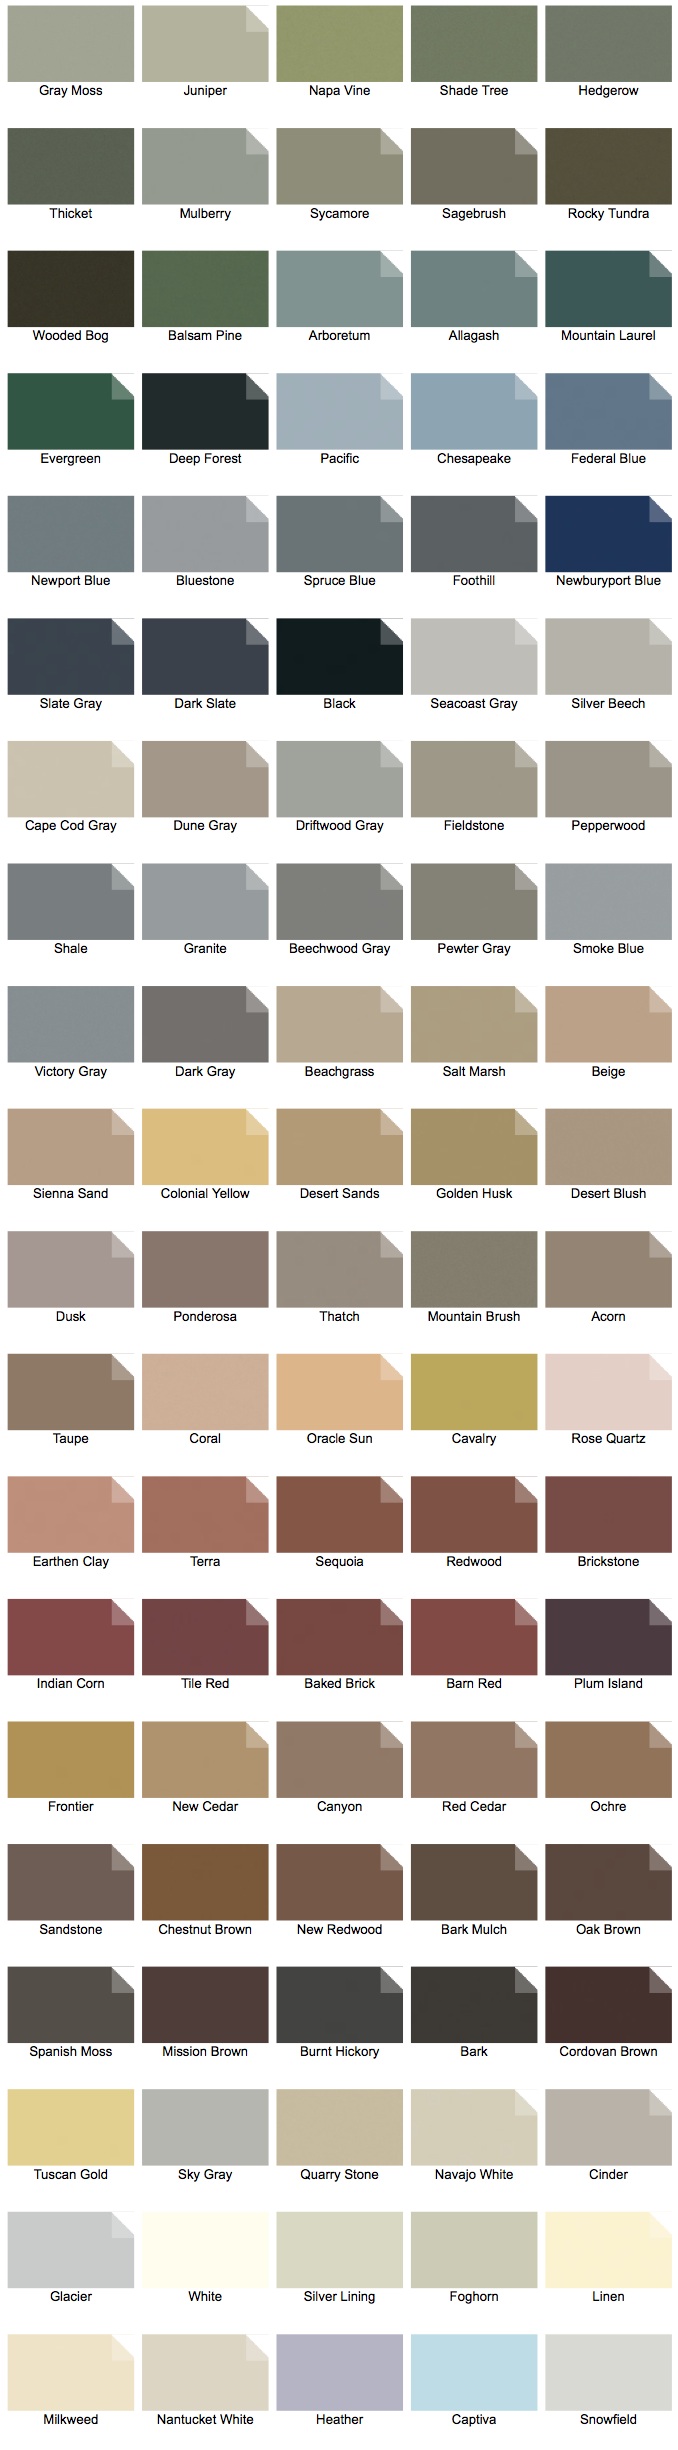 Solid Stain Colors | The Southern Porch Company: Sunrooms, Screened ...